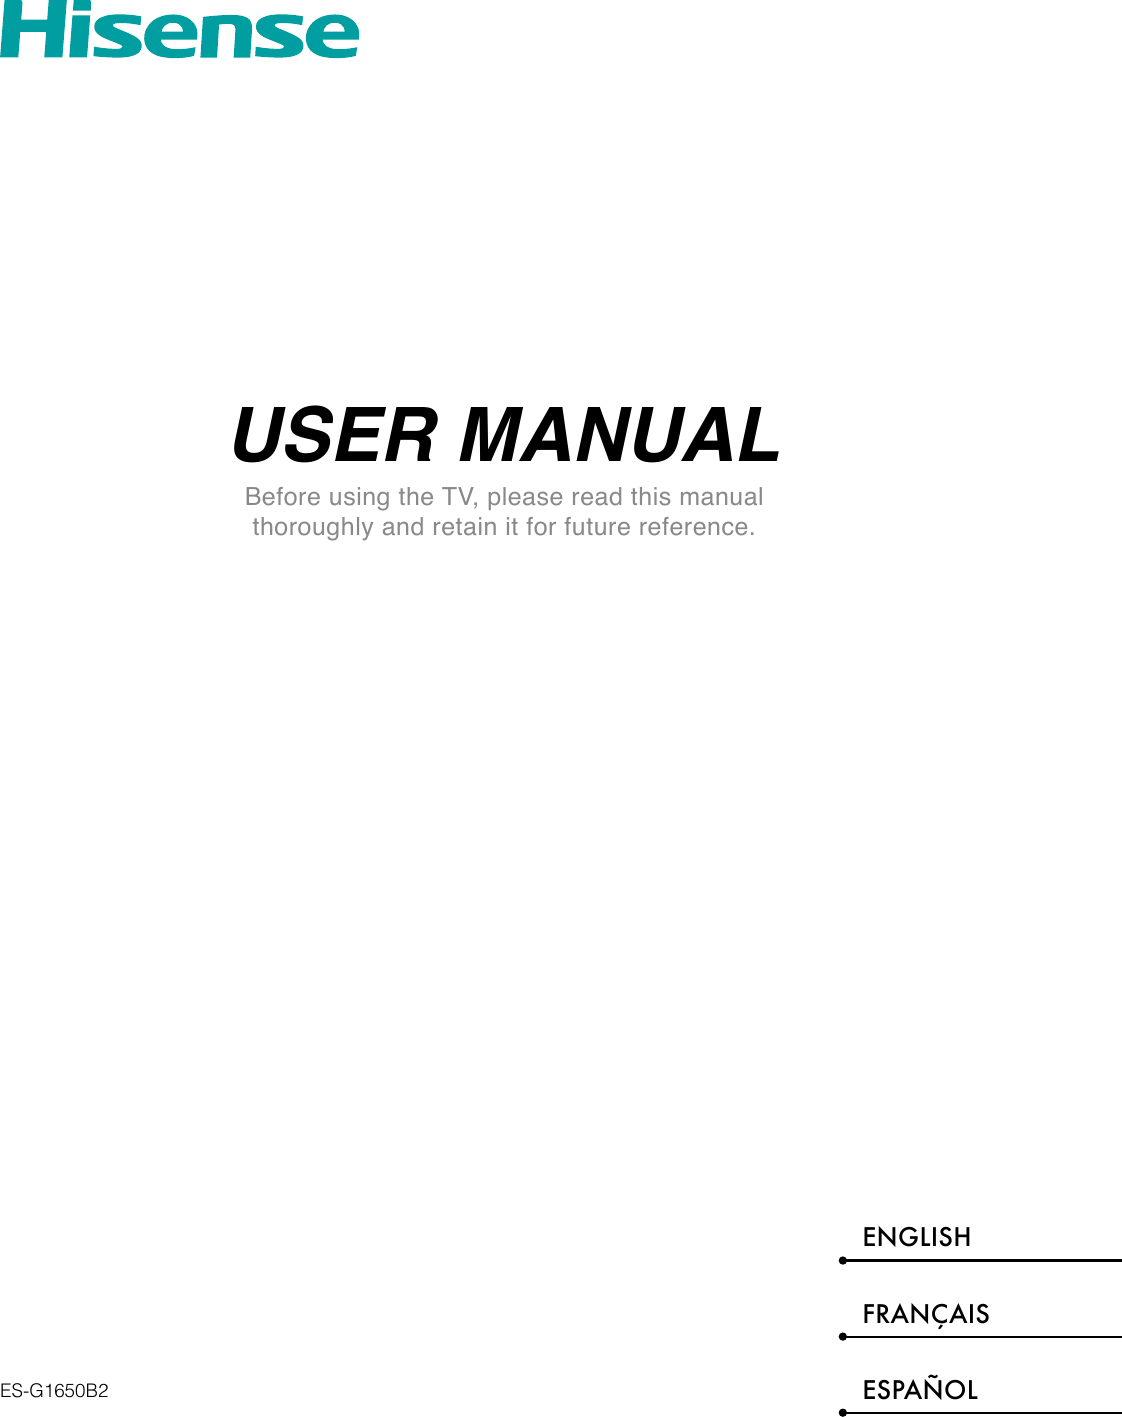 USER MANUALBefore using the TV, please read this manual thoroughly and retain it for future reference.ENGLISHFRANÇAISESPAÑOLES-G1650B2